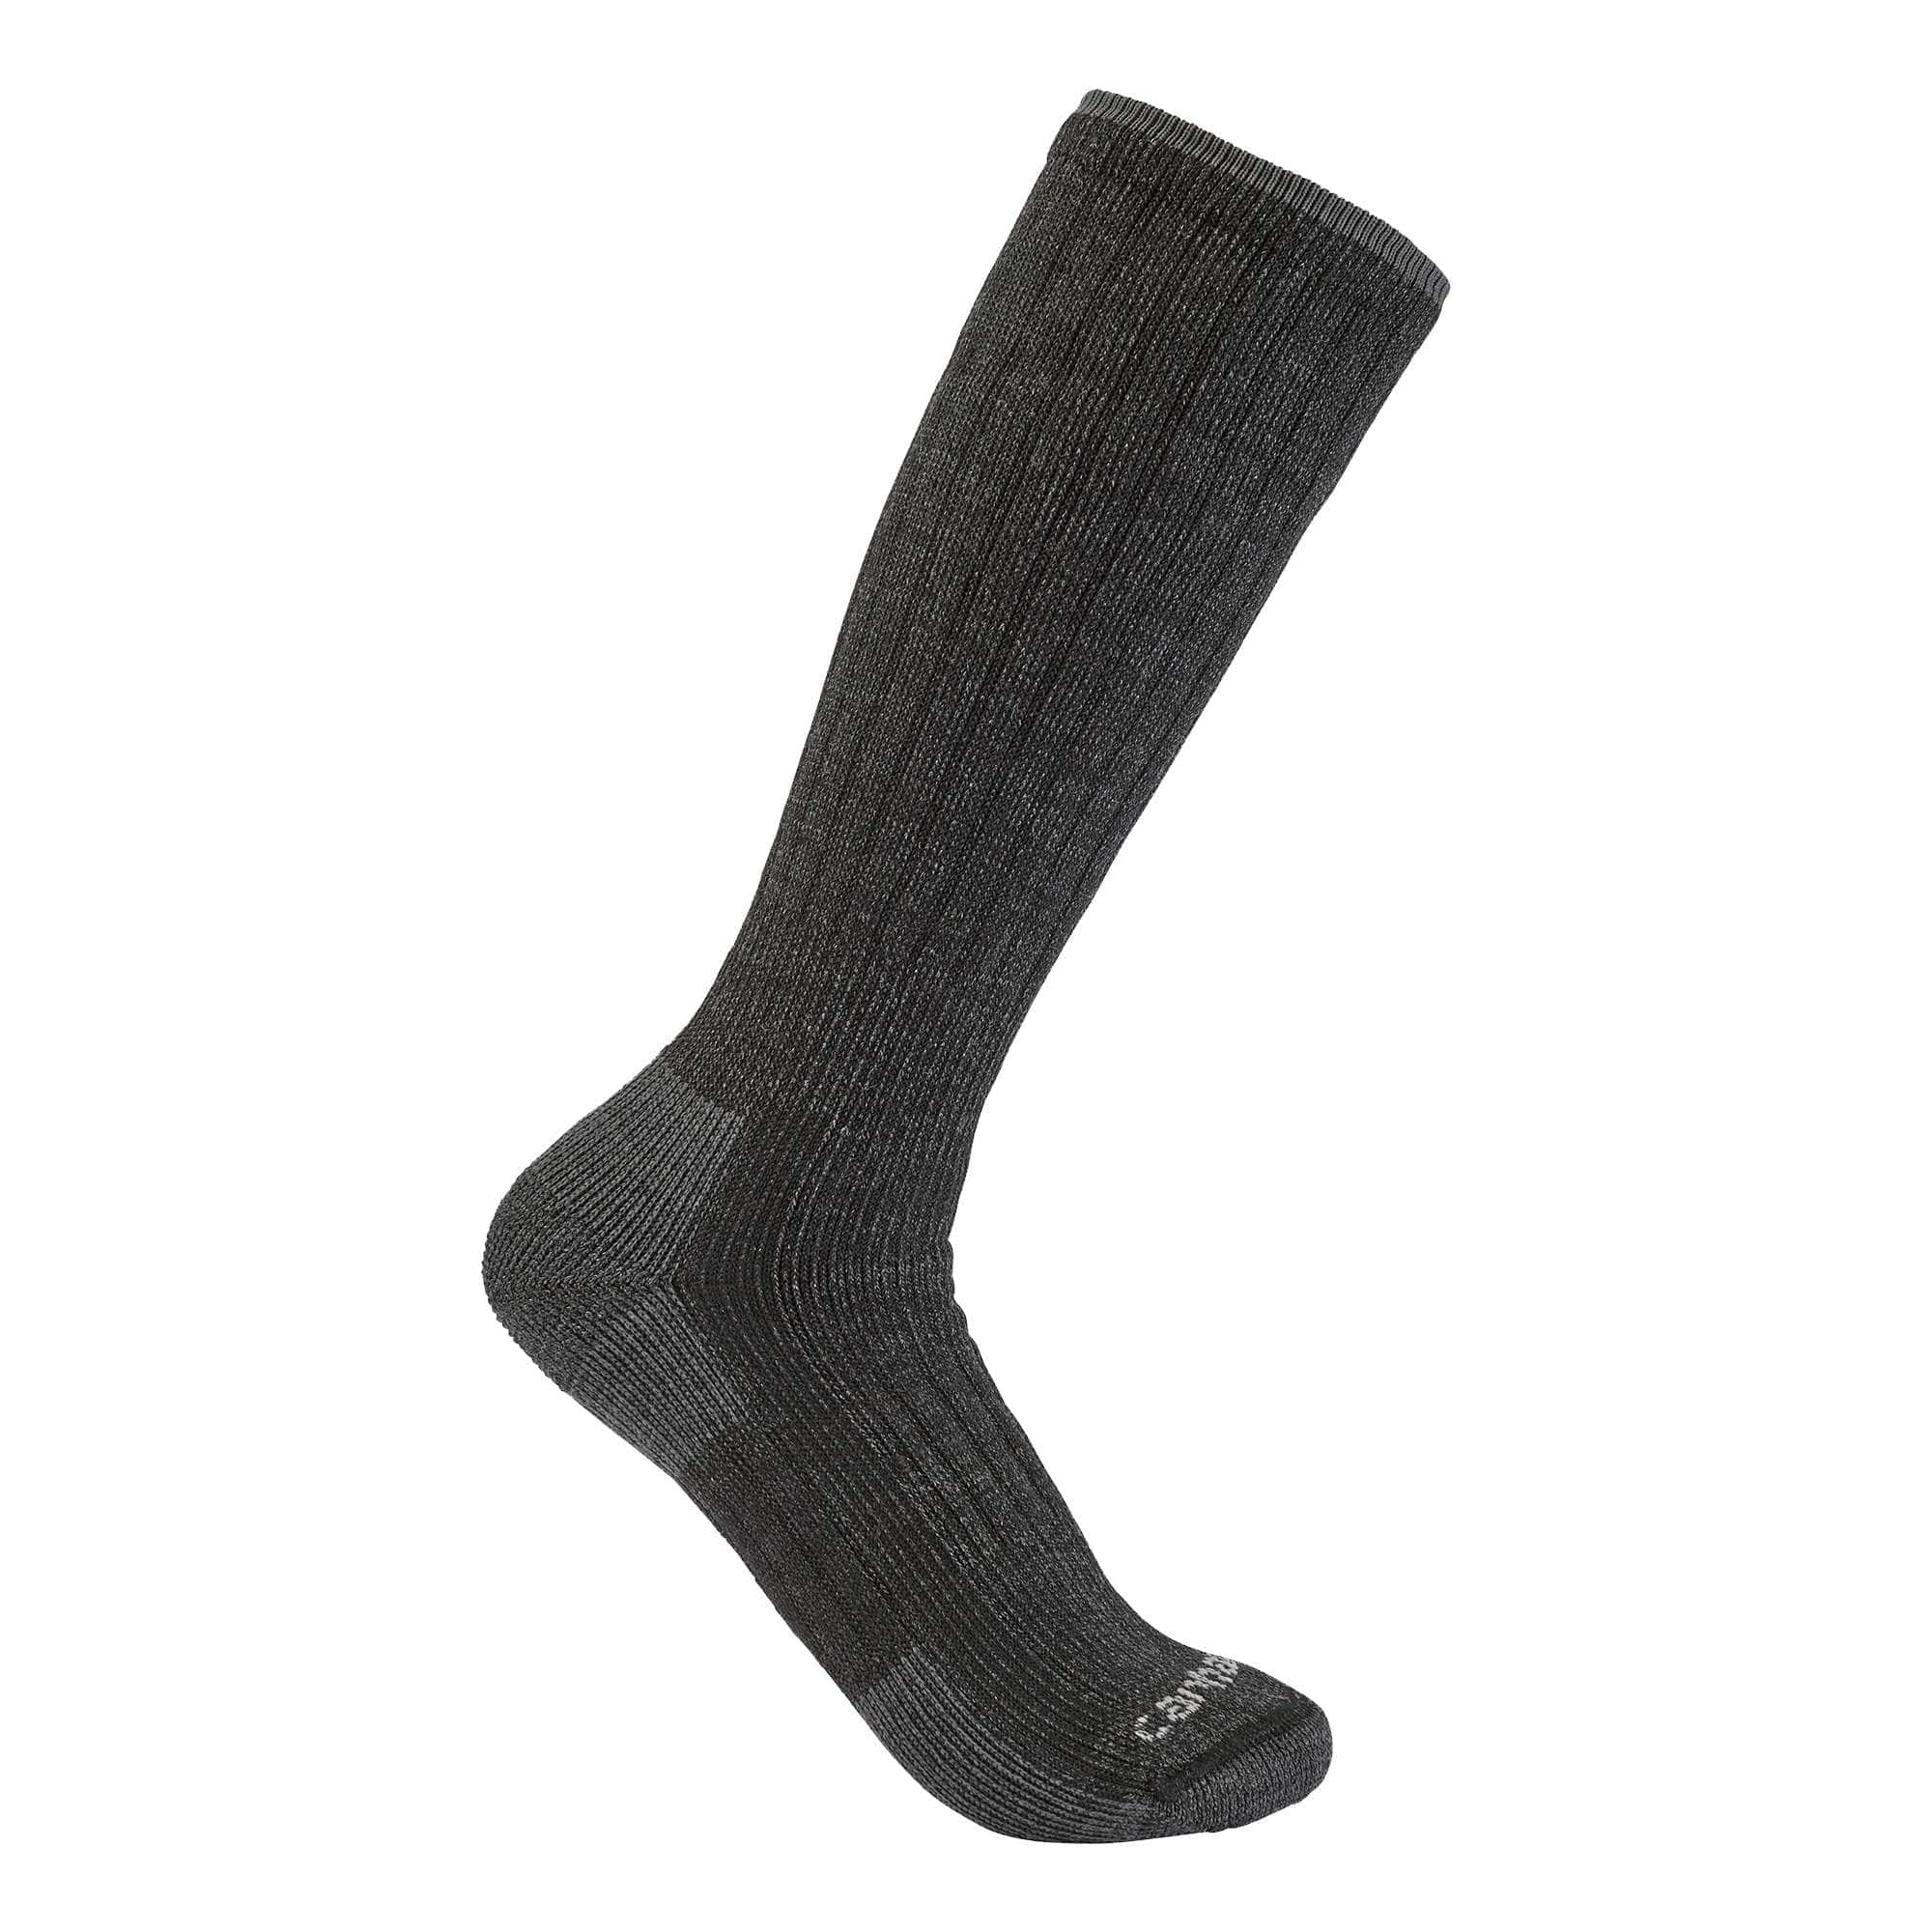 Midweight Synthetic-Wool Blend Boot Sock